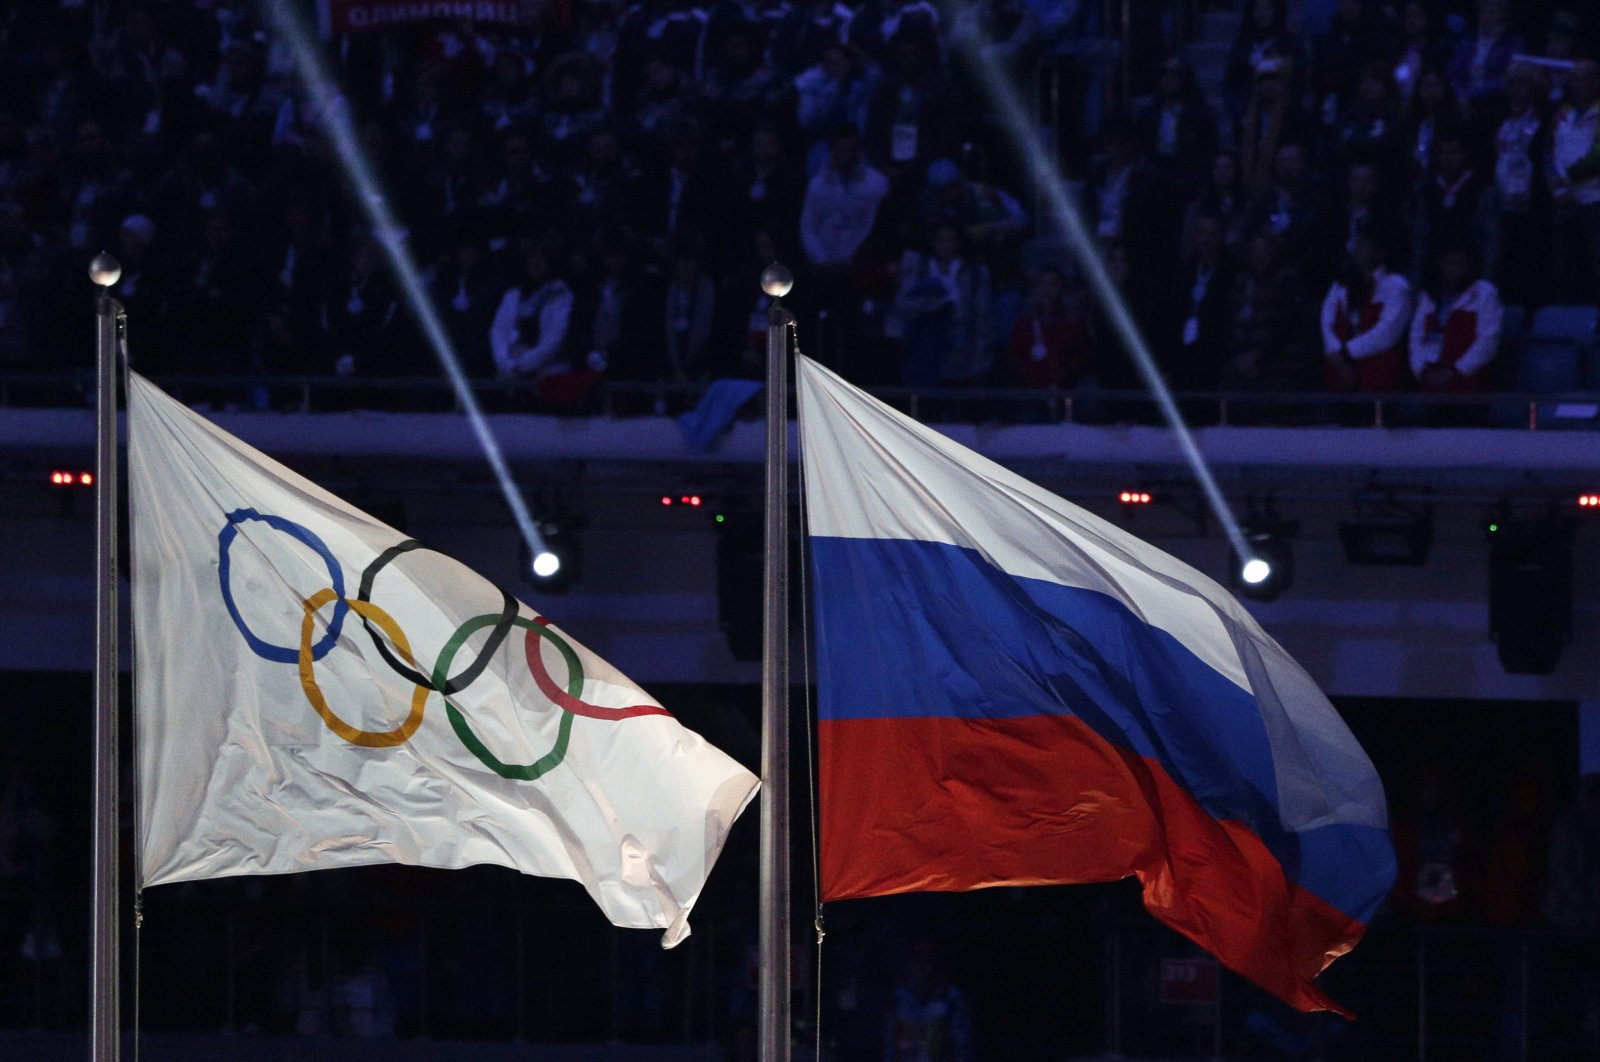 The Olympic flag (L) flies next to the Russian national flag during the closing ceremony of the 2014 Winter Olympics in Sochi, Russia, Feb. 23, 2014. (AP Photo)